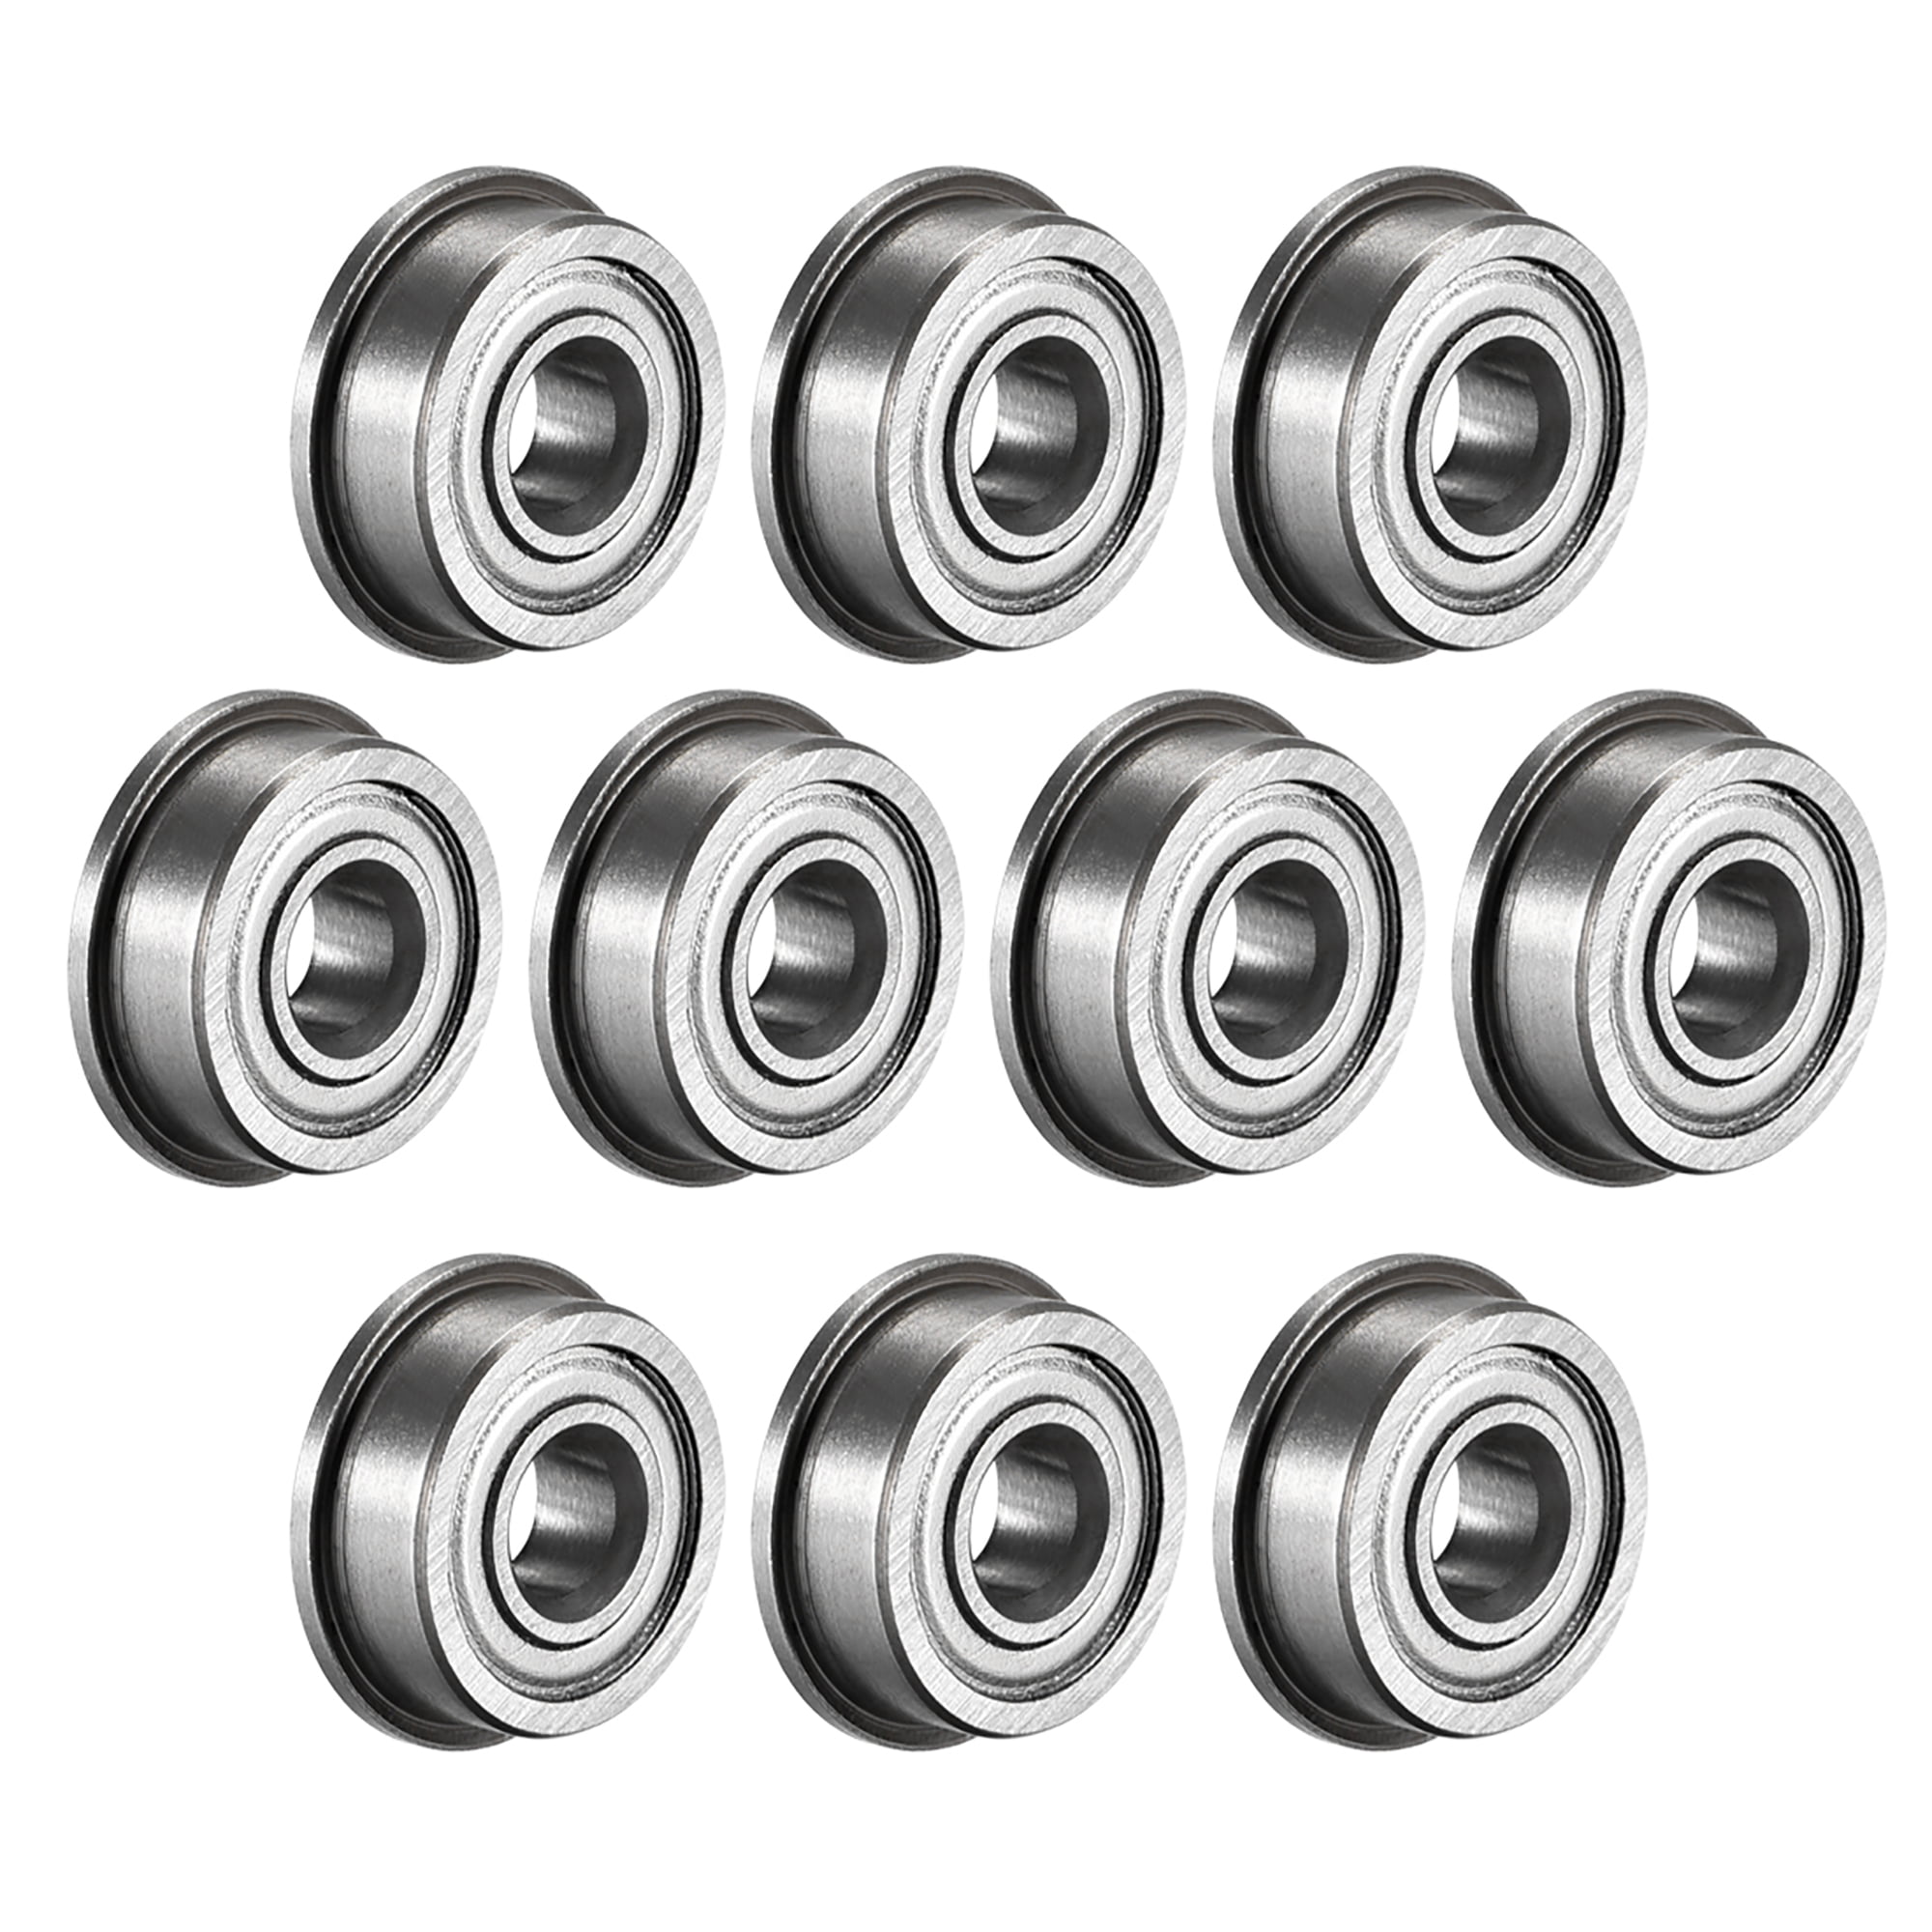 2 x F605zz Metal Double Shielded  Flanged  Ball Bearings 5mm*14mm*5mm 